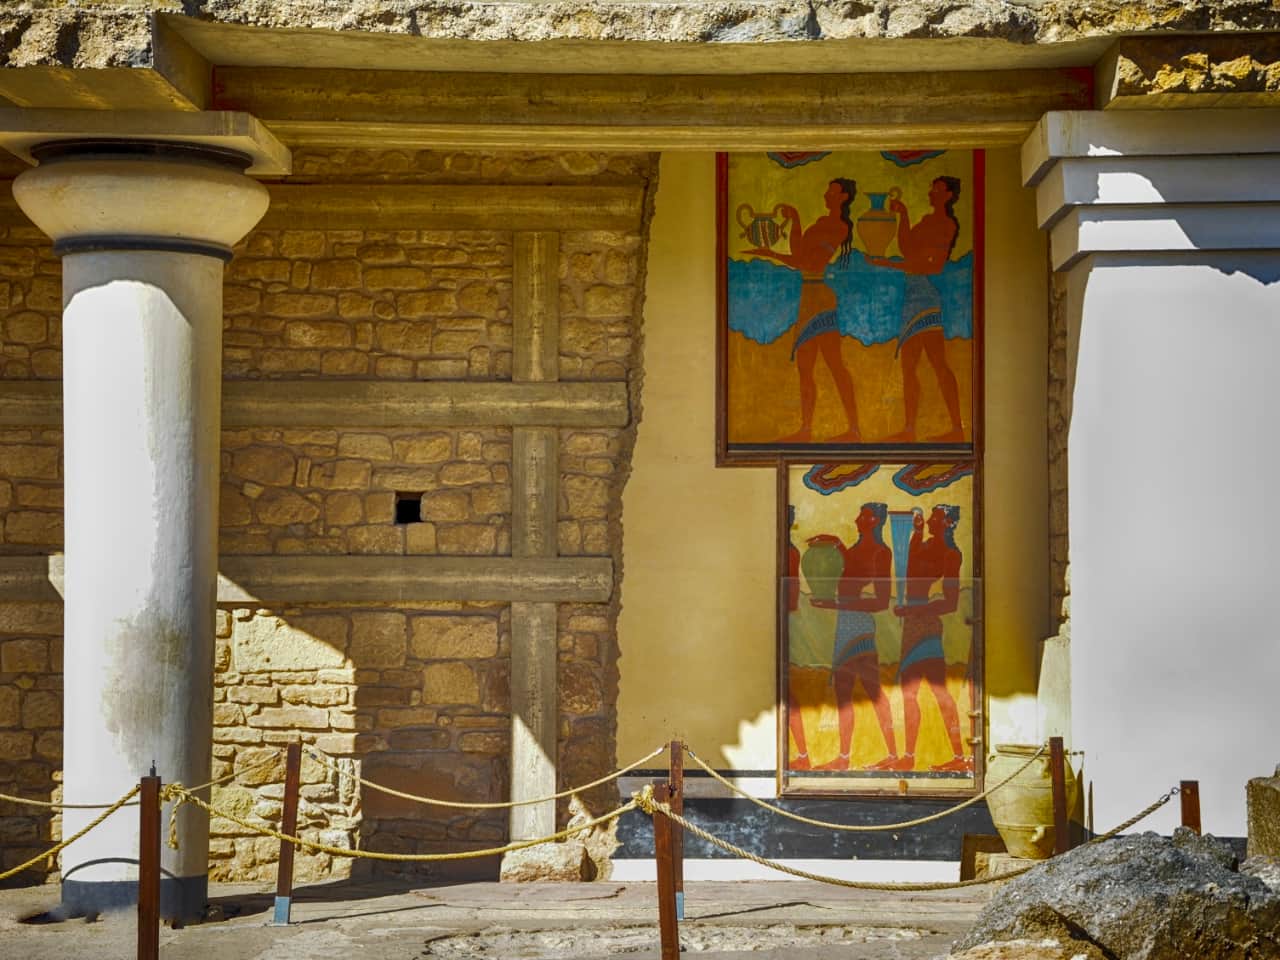 meet the minotaur, Palace of Knossos and the Archaeological Museum of Heraklion, historical tour knossos, historical tour heraklion crete, chania excursion tour to knossos and archaeological museum heraklion